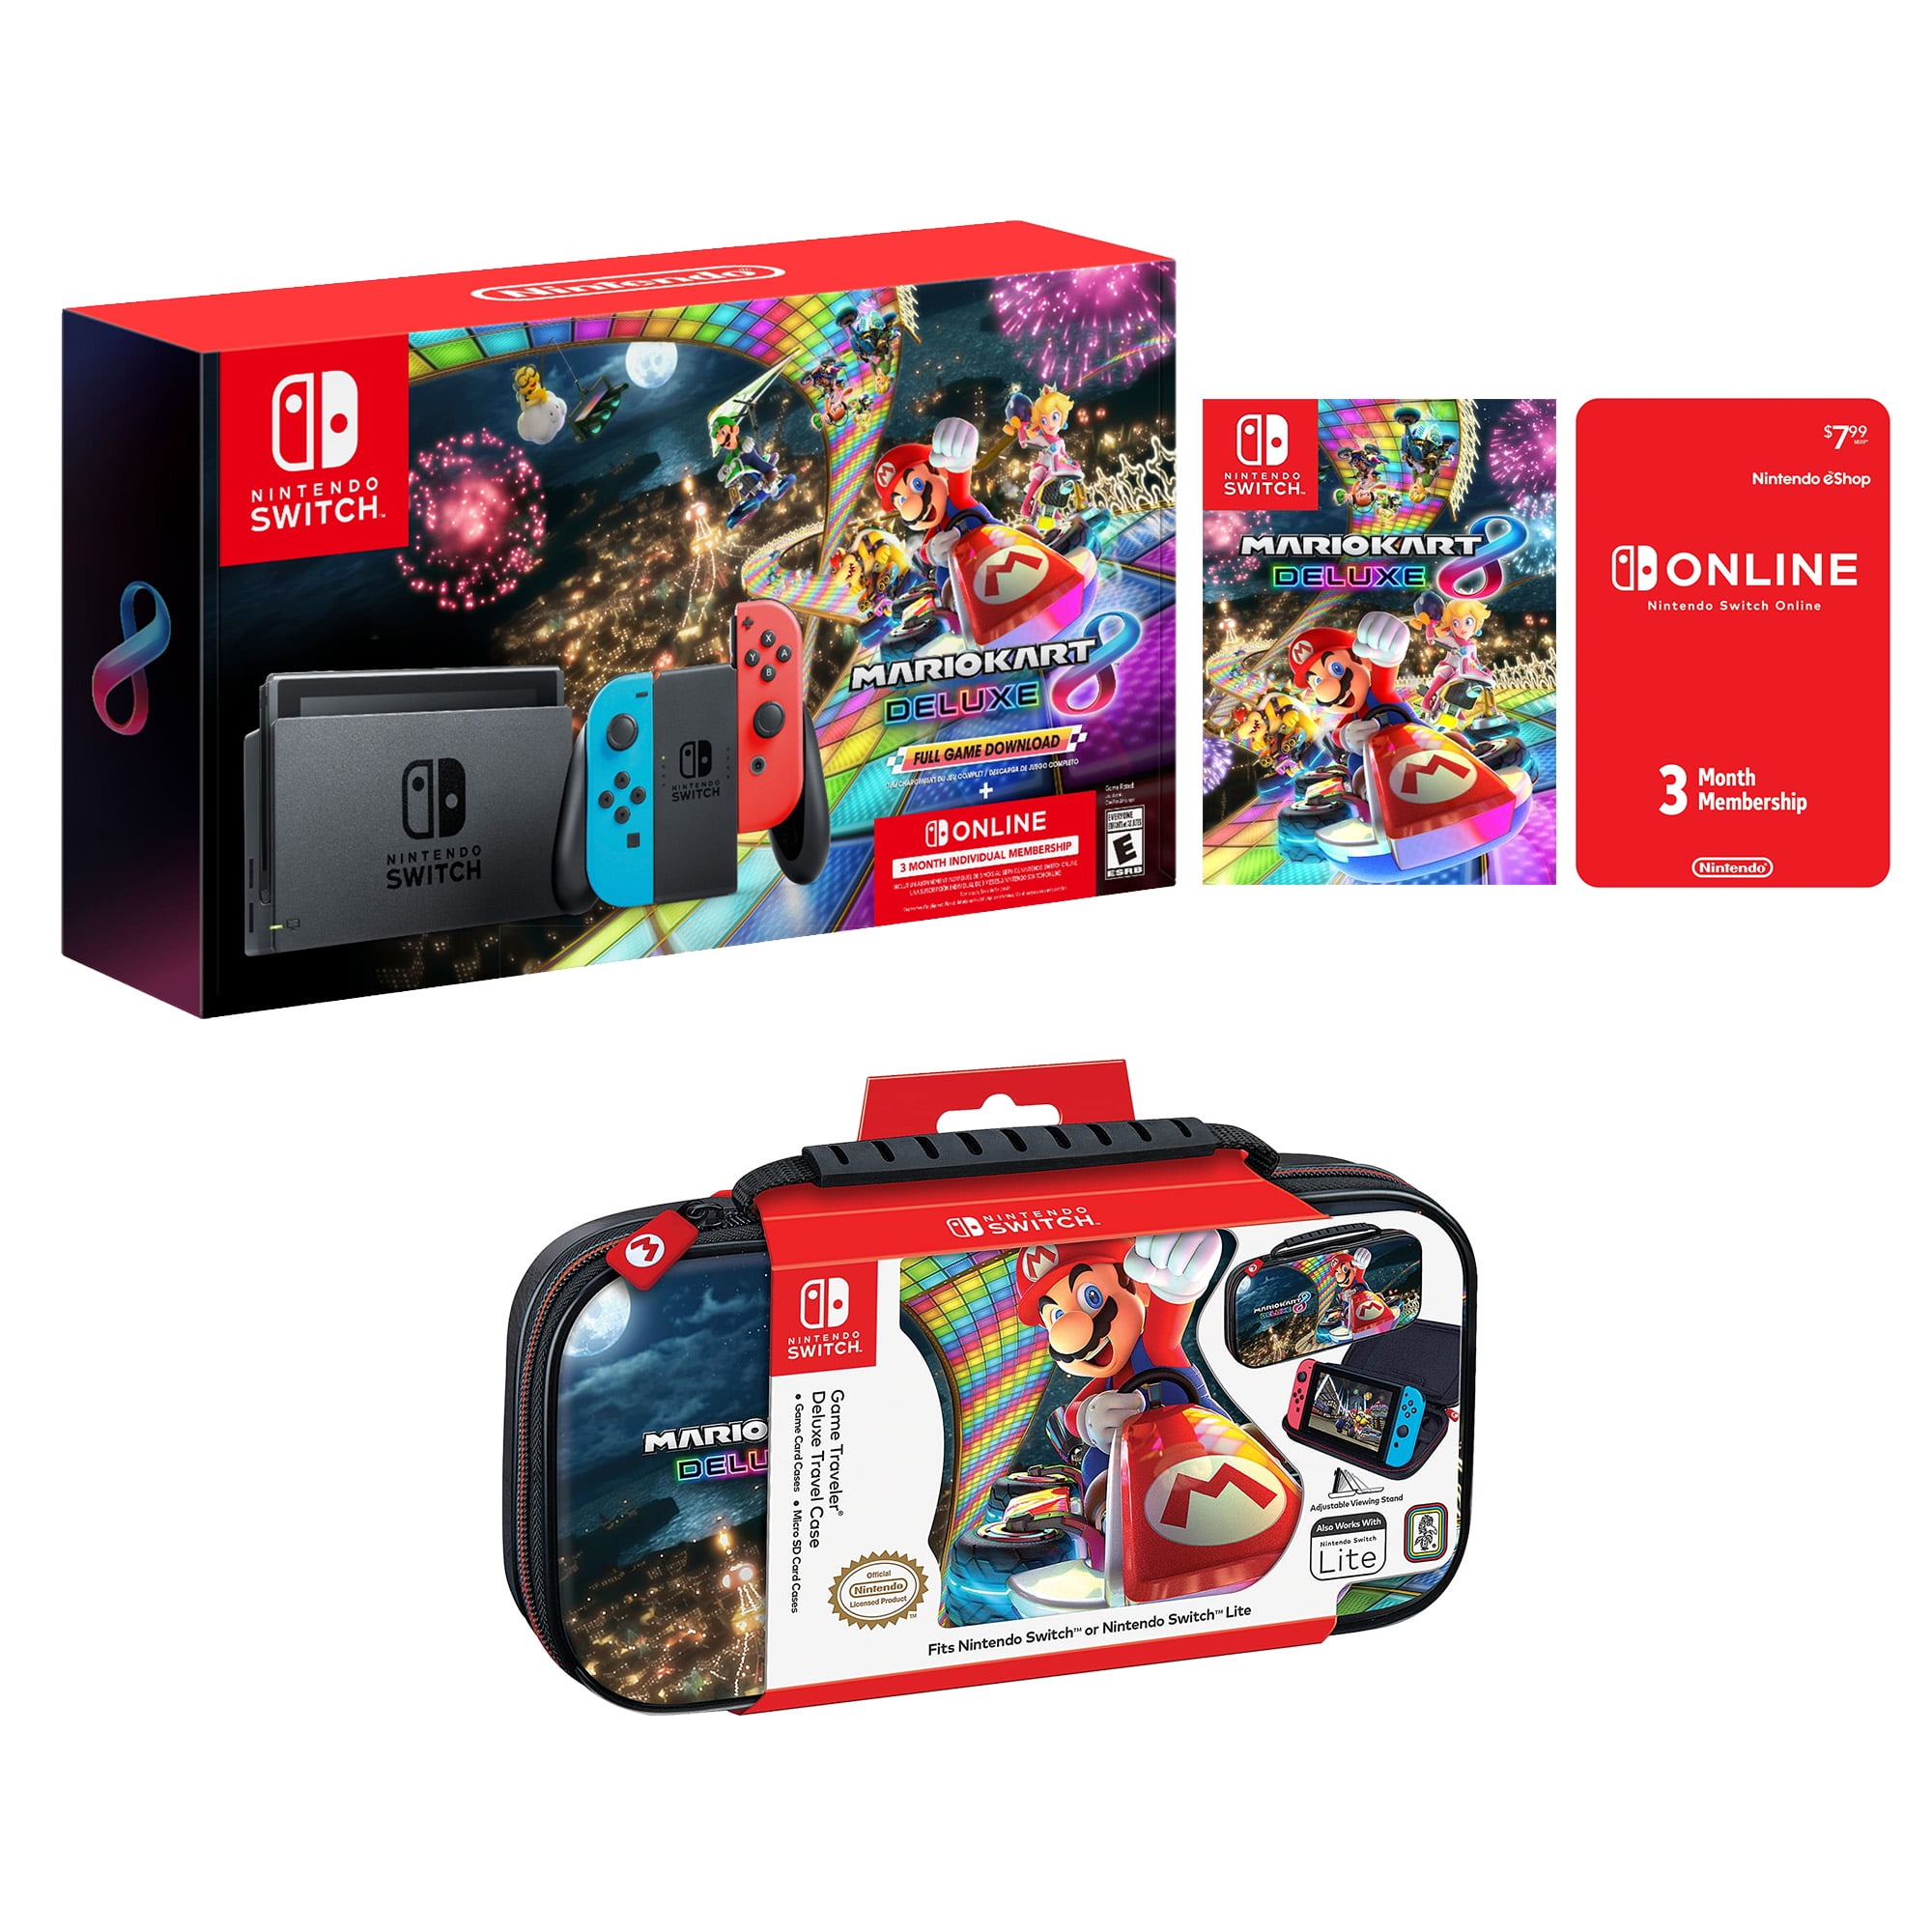 Nintendo Switch Super Mario Kart 8 Deluxe Bundle: Red and Blue Joy-Con Improved Battery Life 32GB Console,Super Mario 8 Travel - Walmart.com